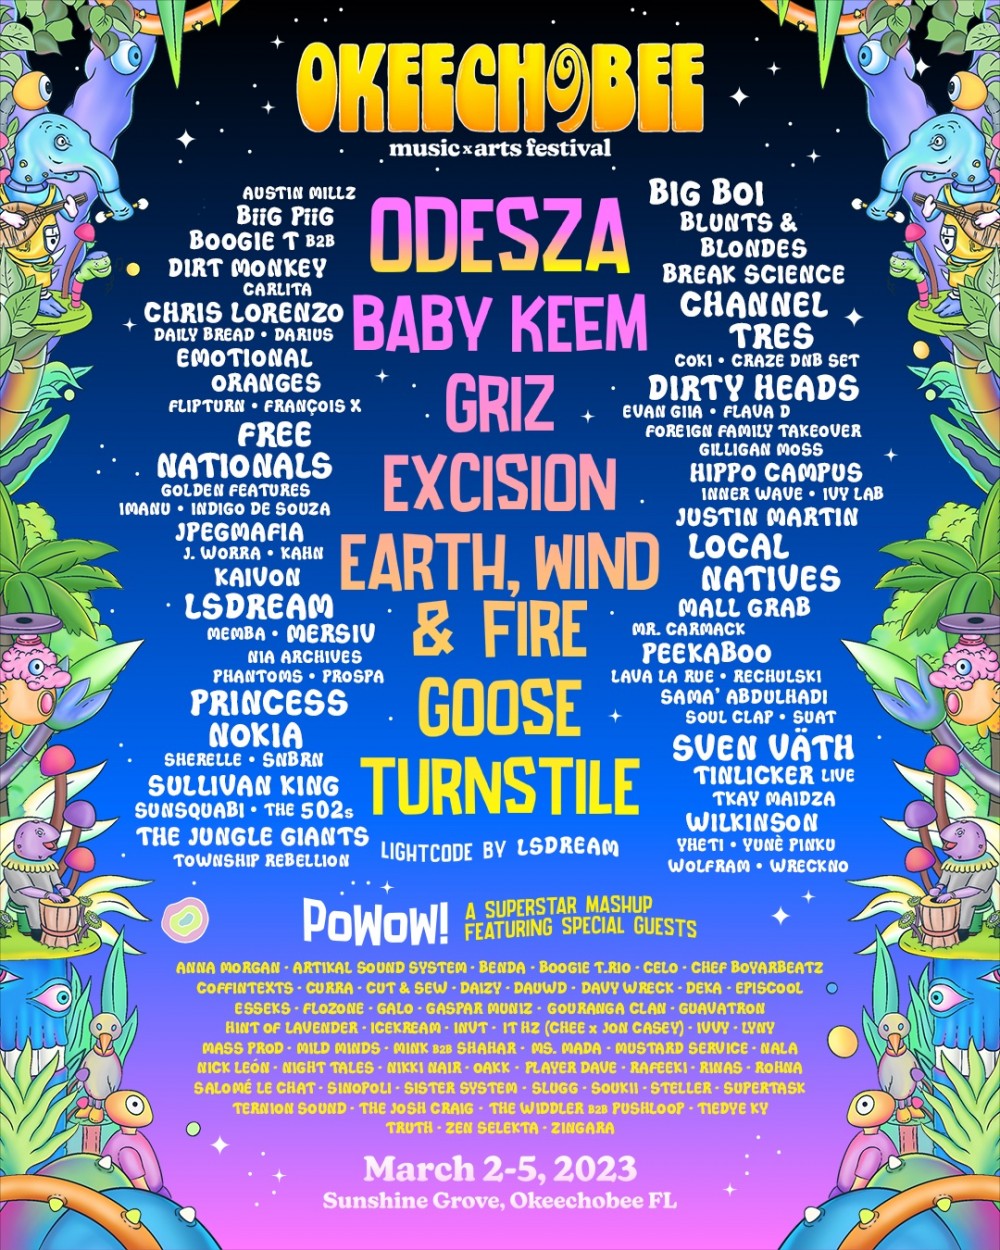 Okeechobee Music & Arts Festival Drops 2023 Lineup, Featuring Odesza, GRiZ, Excision, and More